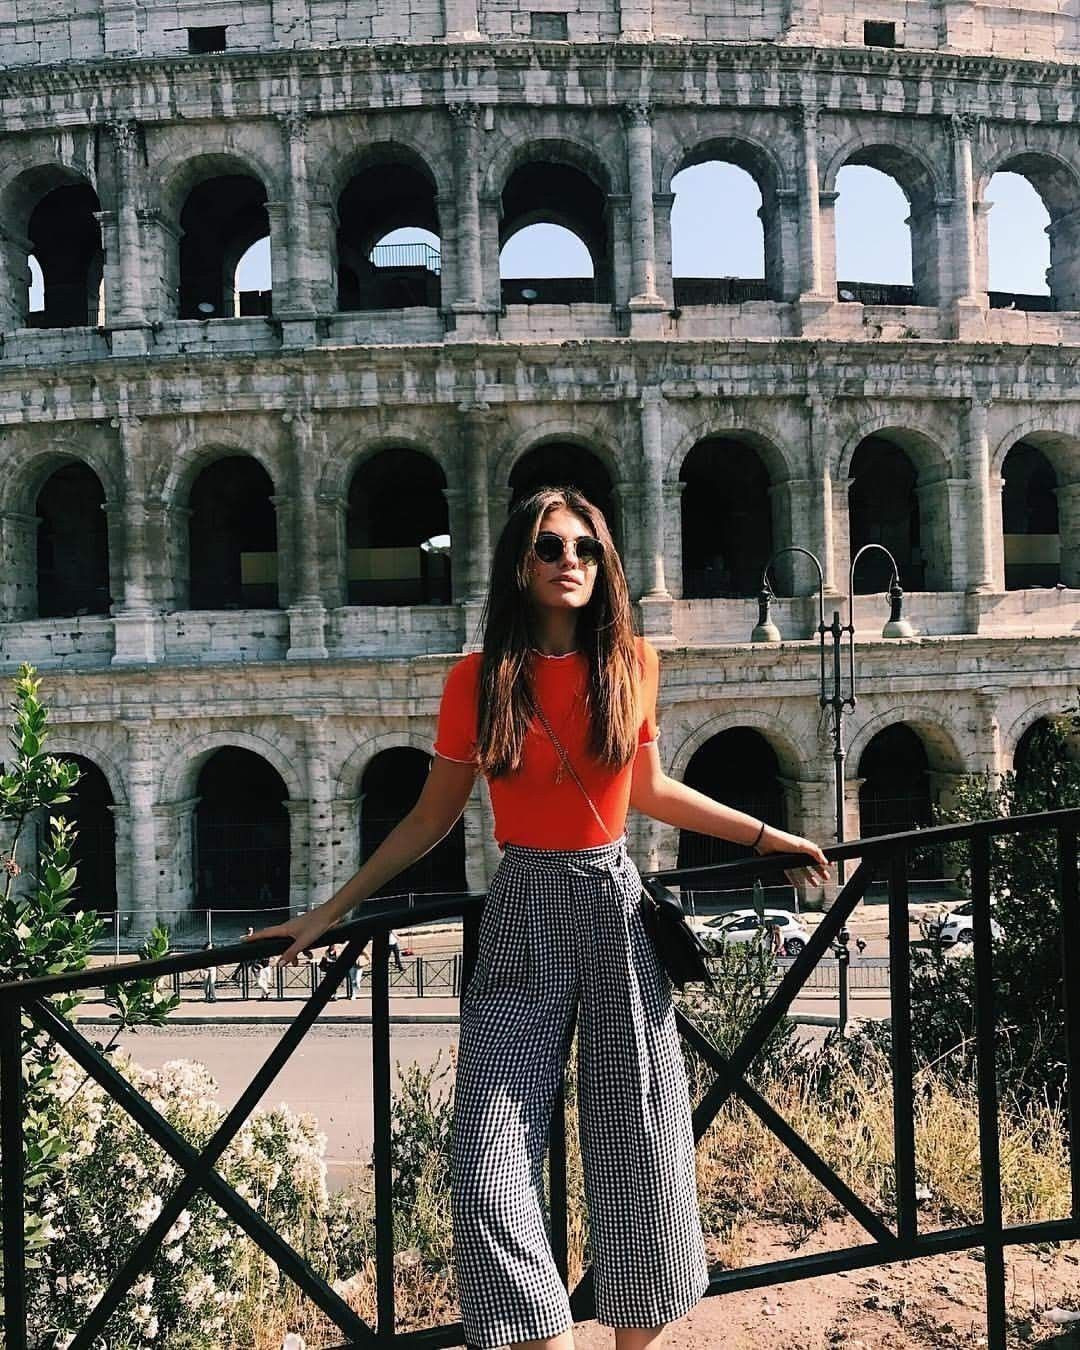 The Beautiful Colosseum Is The Perfect Backdrop In Rome